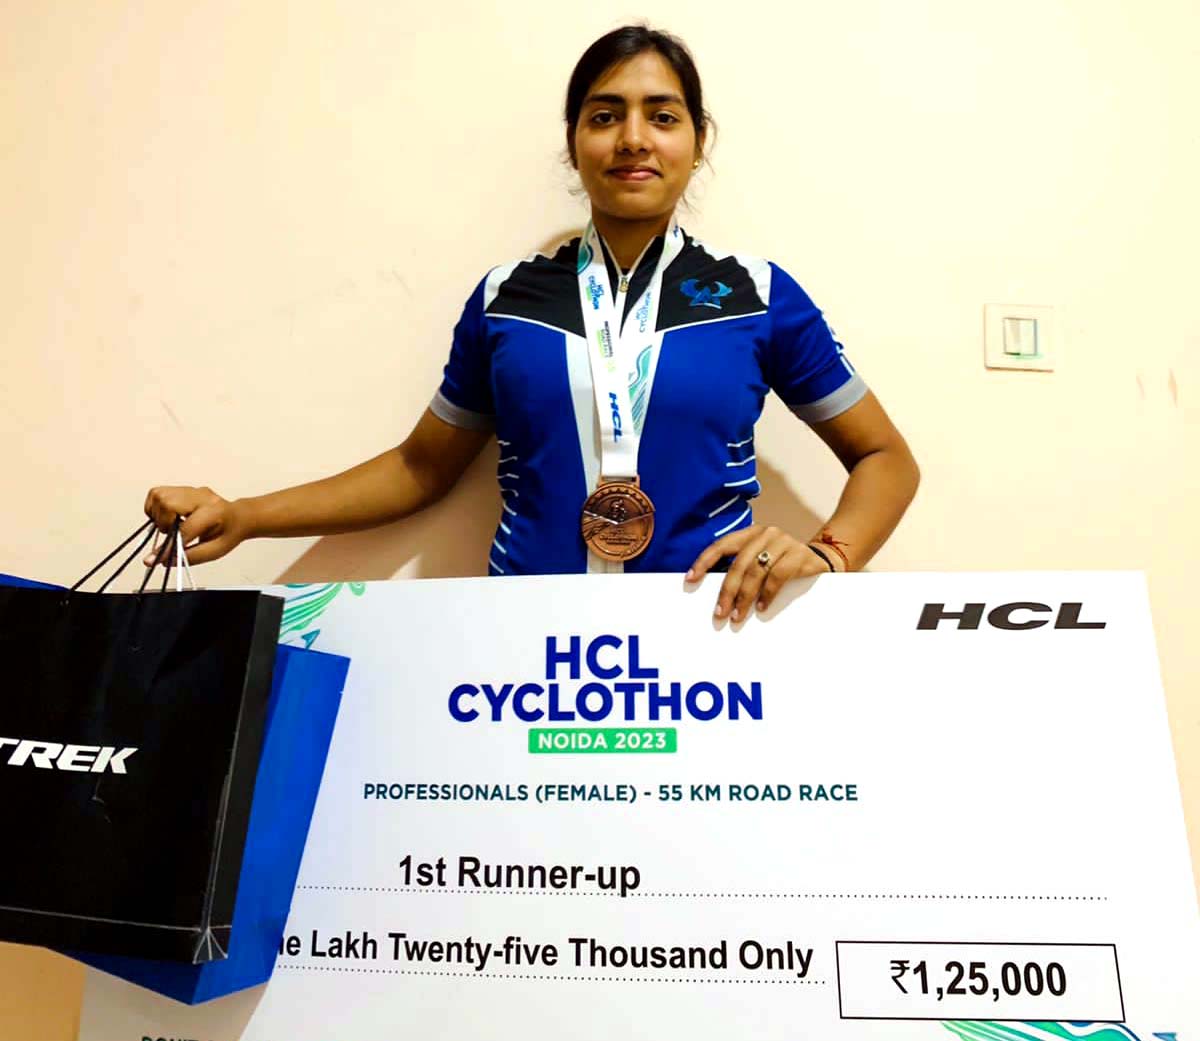 Odisha cycling international Swasti Singh poses with her 1st runner-up prize at the 1st HCL Cyclothon 2023 in Noida, Uttar Pradesh on 19 March 2023.